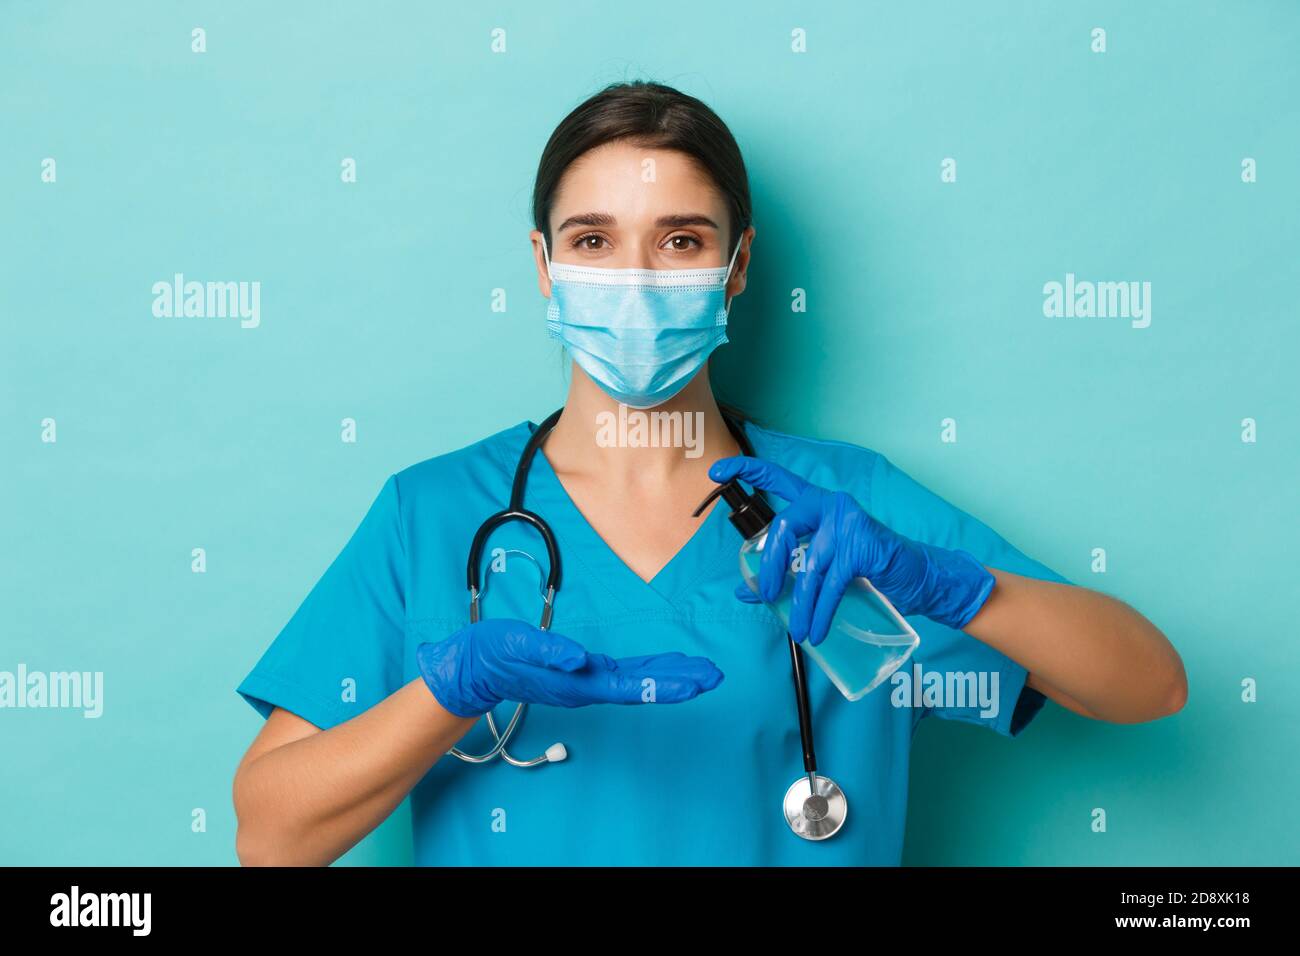 Concept of covid-19 and quarantine concept. Close-up of beautiful female doctor in medical mask, gloves and scrubs, using hand sanitizer, standing Stock Photo